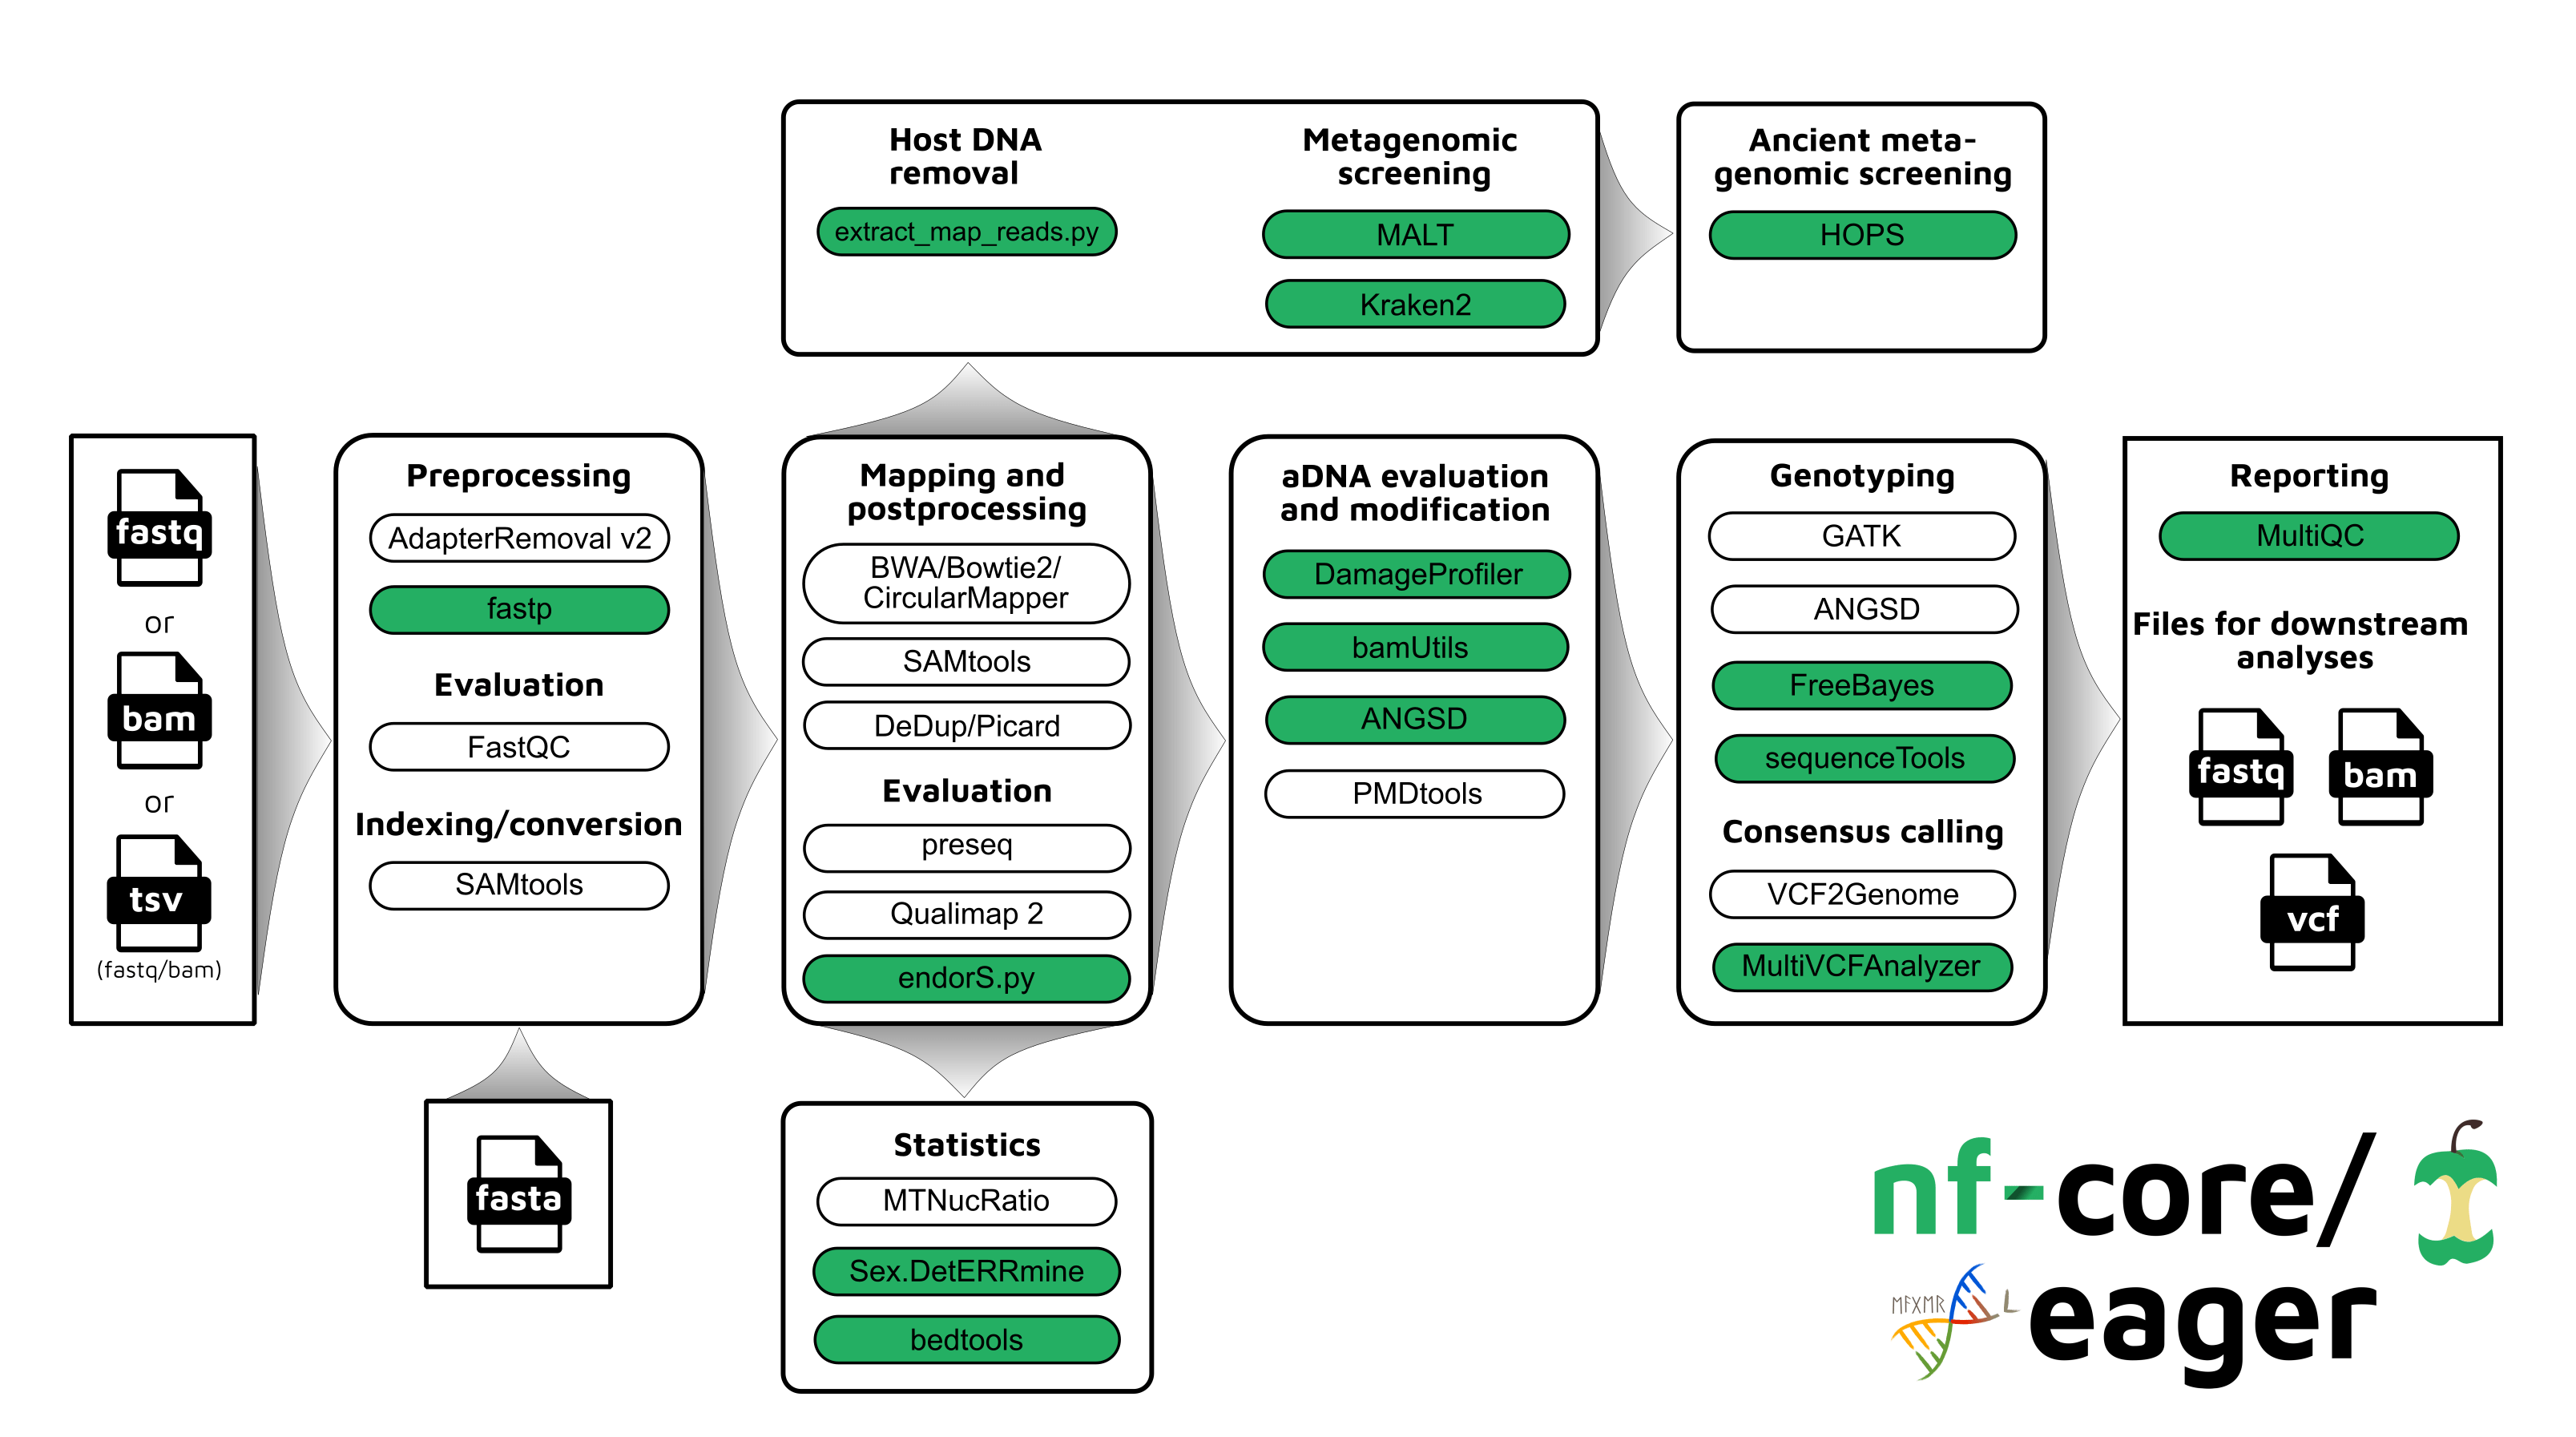 nf-core/eager schematic workflow